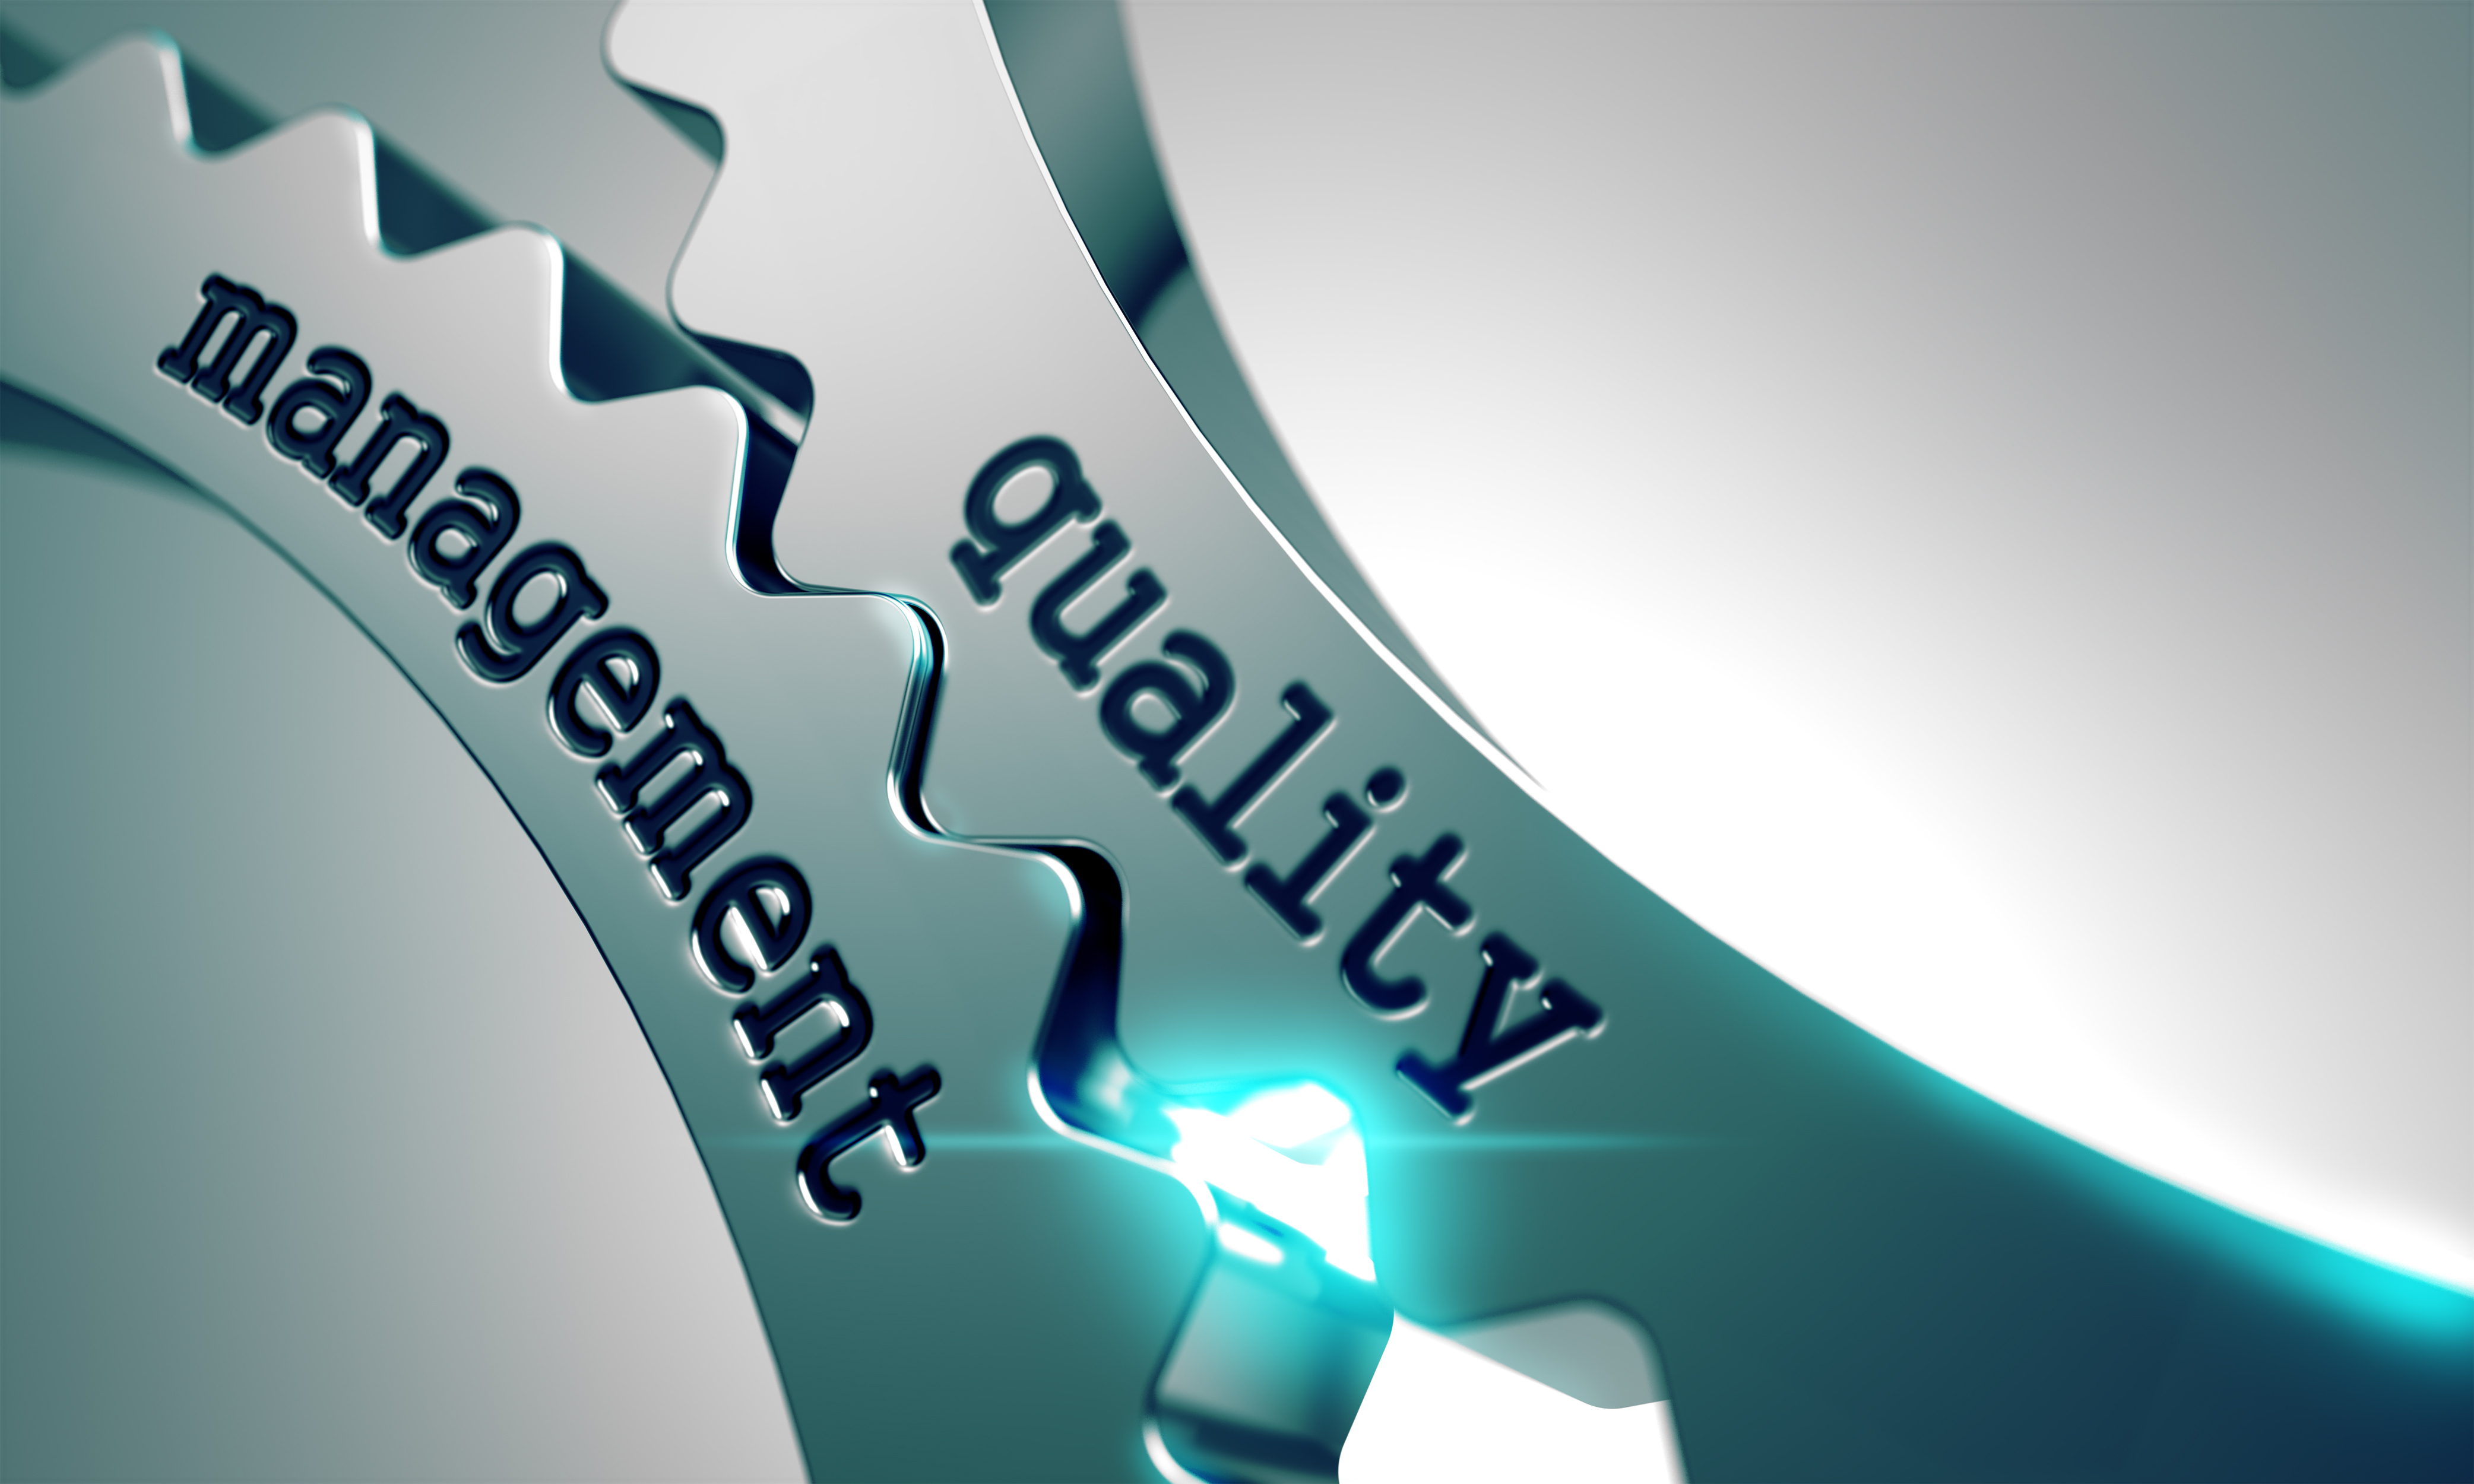 Gurelan and quality: the engagement driving this project